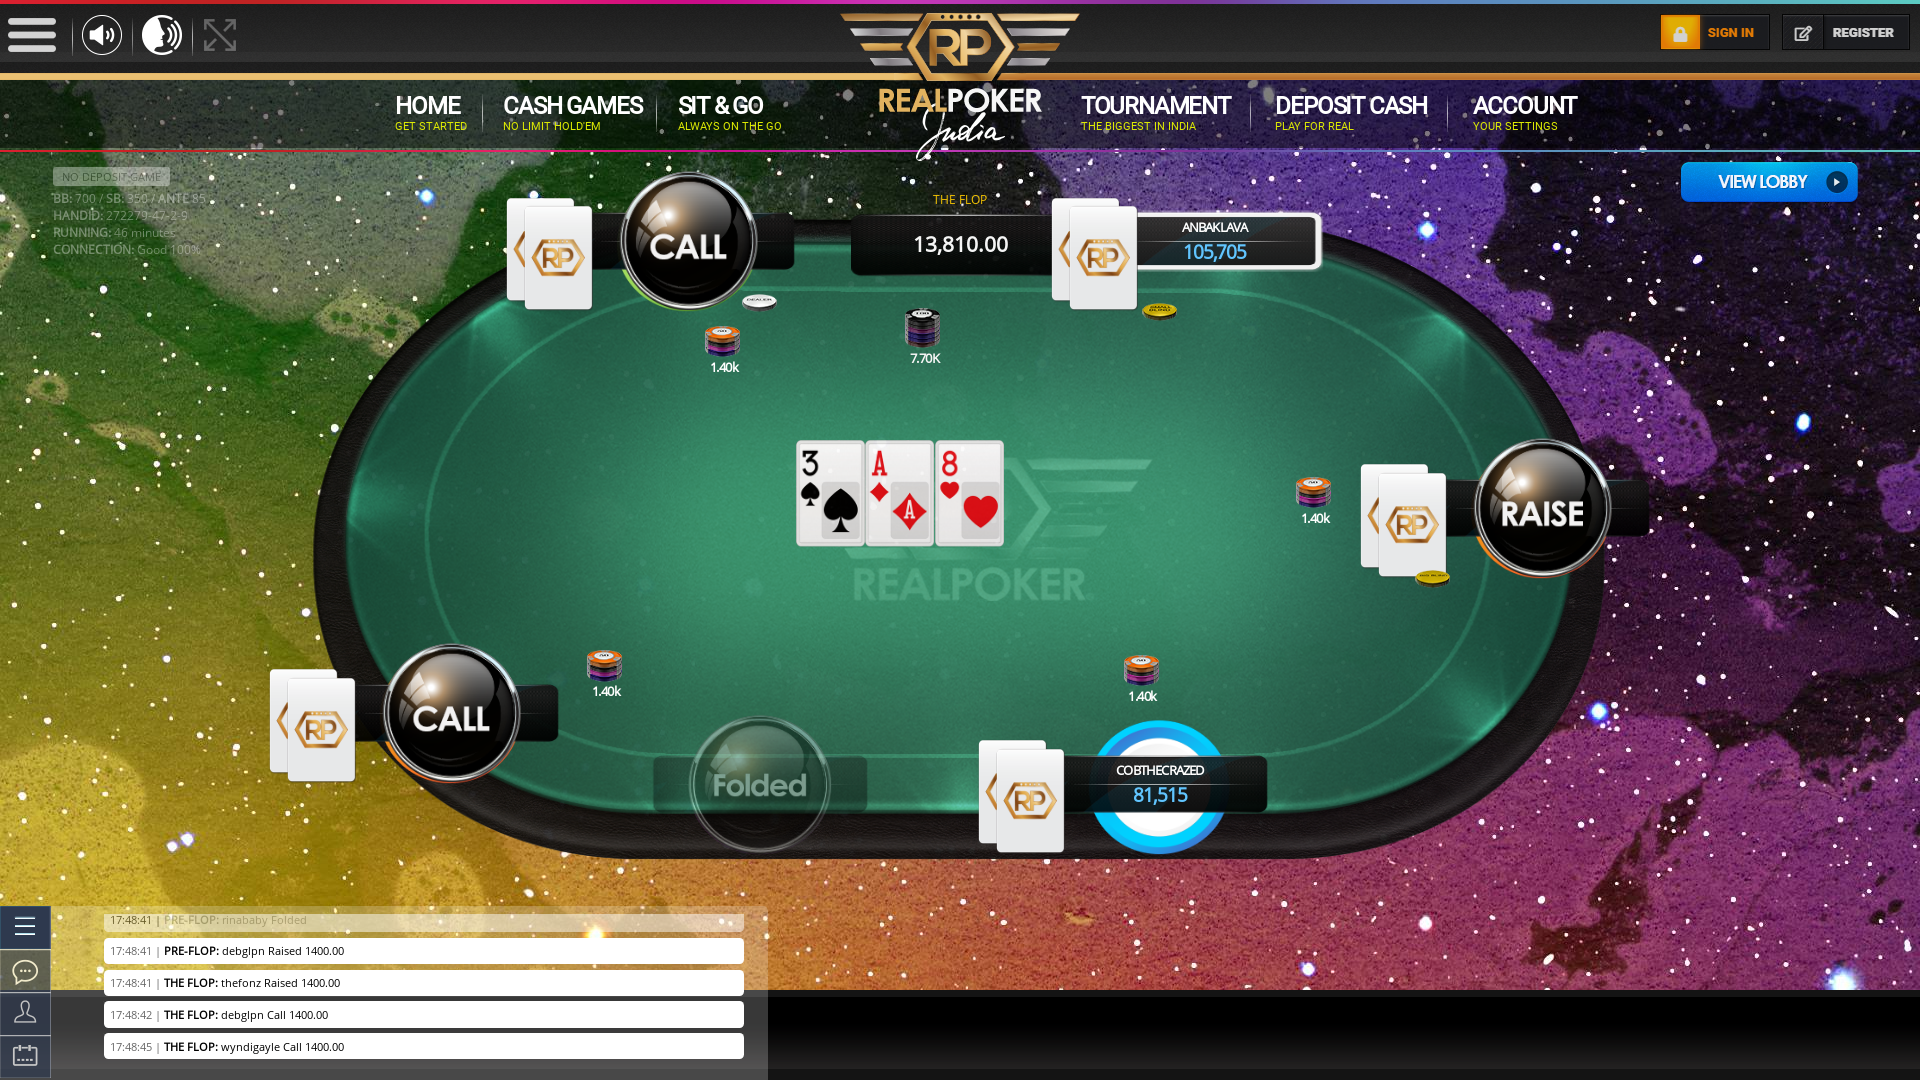 Indian poker on a 10 player table in the 46th minute